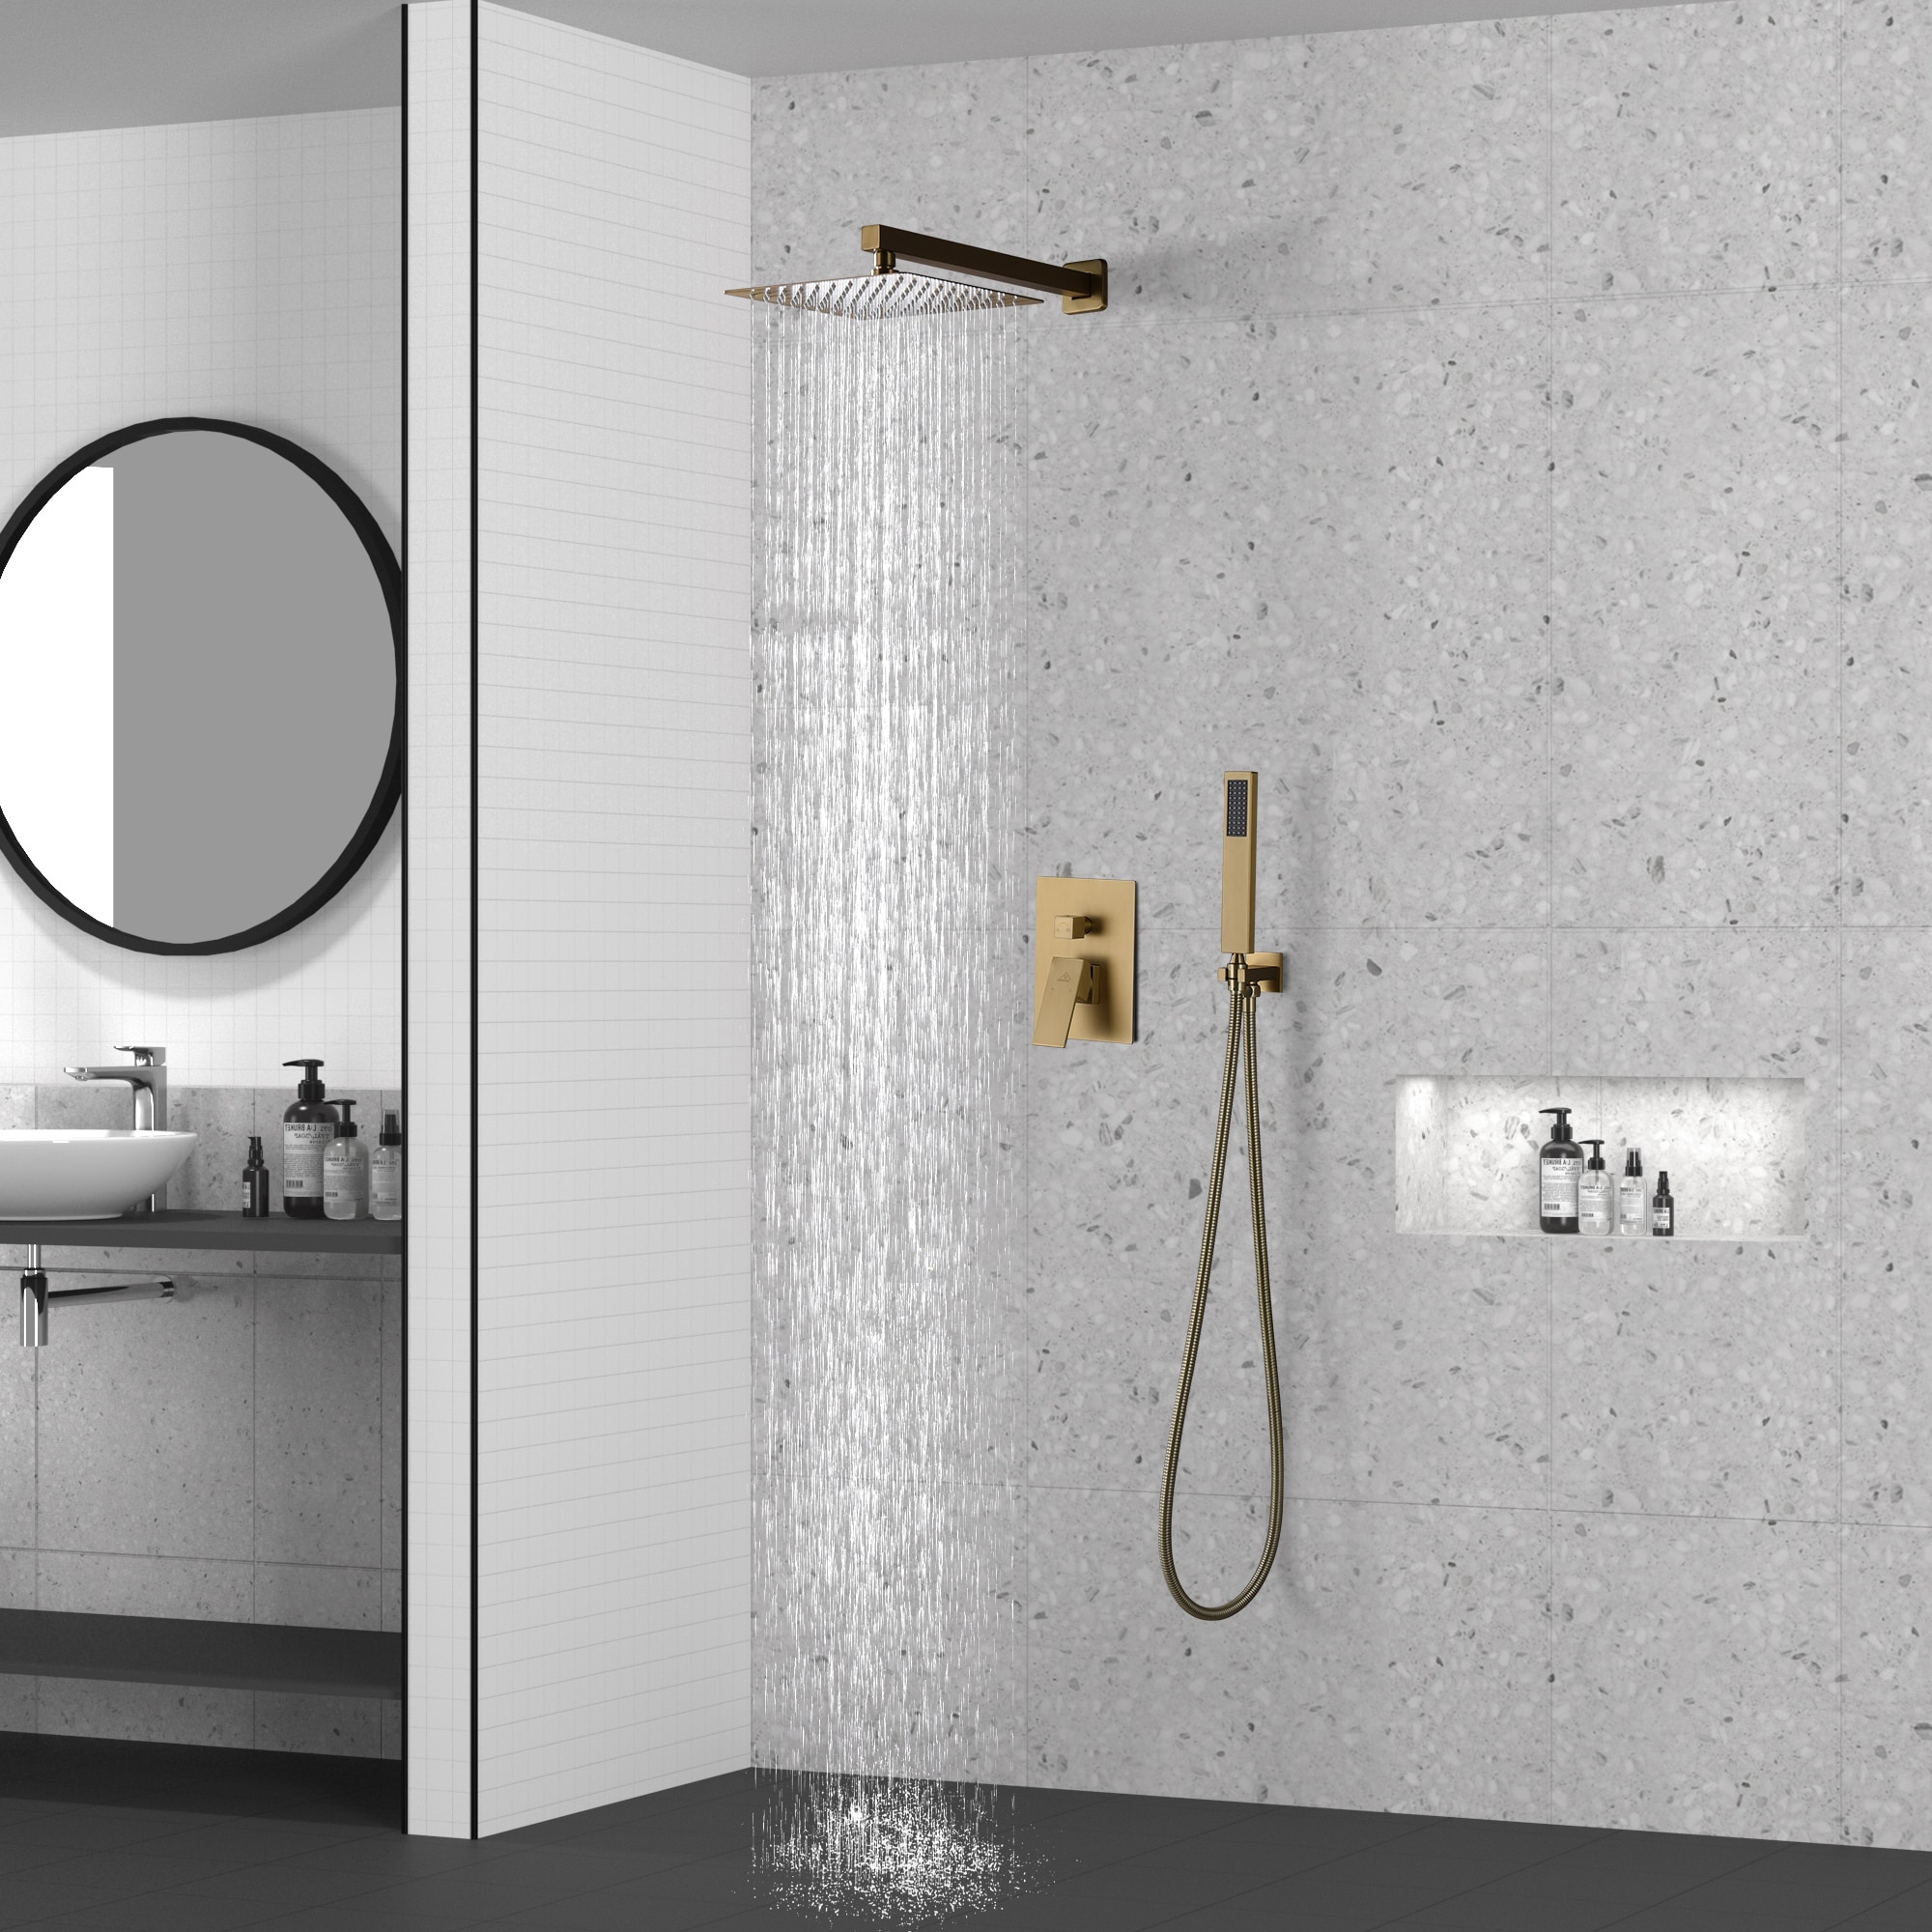 CASAINC Brush Gold Waterfall Built-In Shower Faucet System with 2-way Diverter Pressure-balanced Valve Included